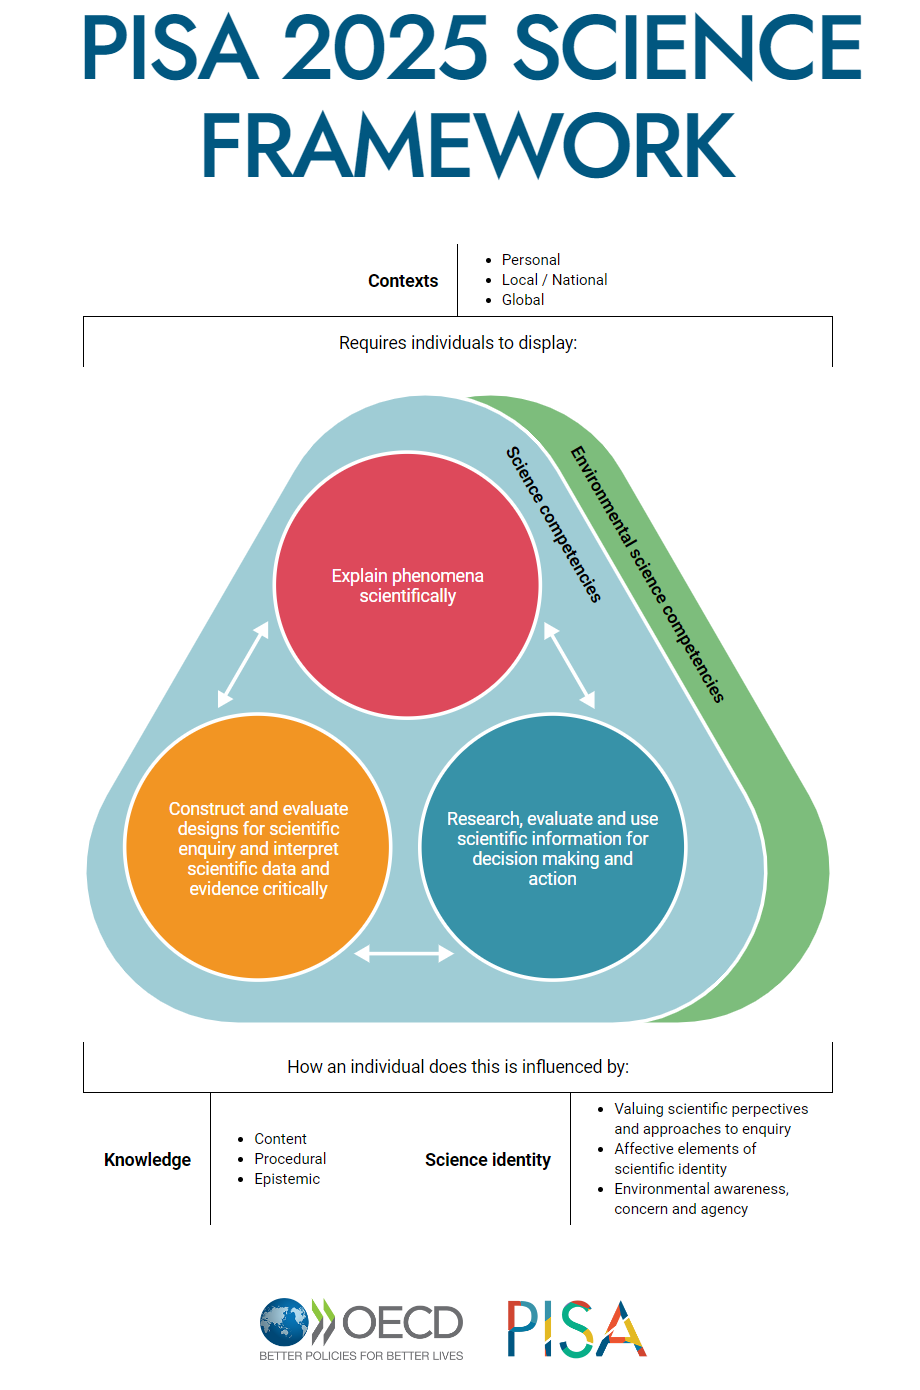 The PISA 2025 Science Framework incorporates 3 main facets of science competencies, situated inside personal, local/national and global contexts, and addressing knowledge retention and and science identity as well. The PISA 2025 framework is used to assess the education of 15-yr-olds in the OECD member countries who participate.